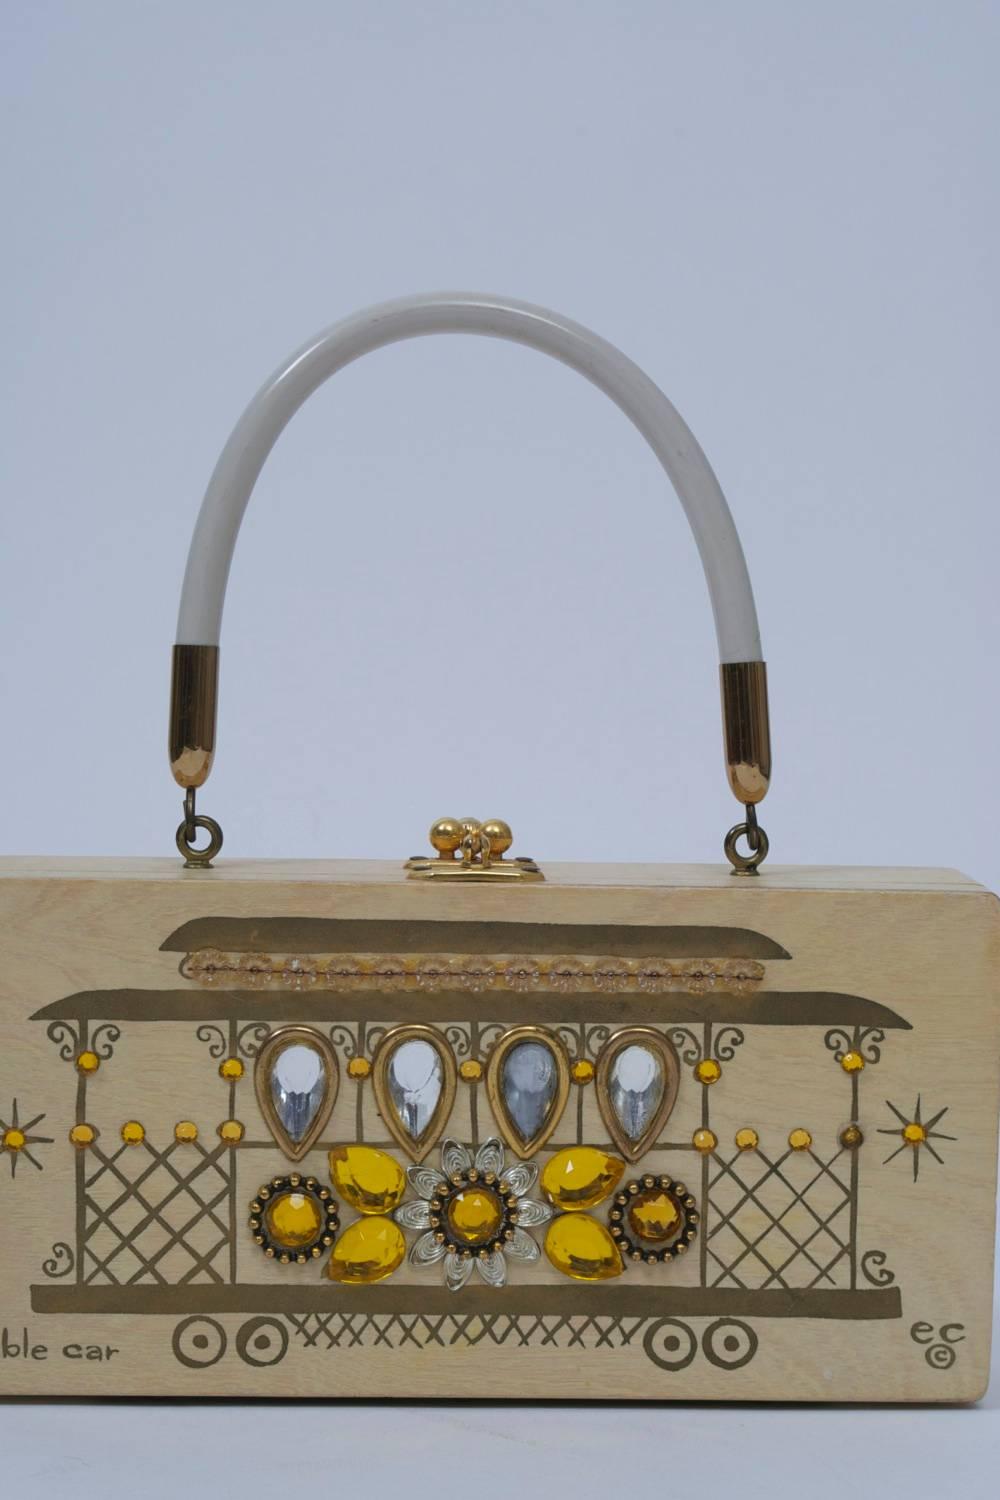 During the 1950s and '60s, Enid Collins produced a popular and collectible line of themed and decorated handbags, both totes and box bags. This wooden box bag celebrates the cable cars of San Francisco, featuring a light wood with gold painting and